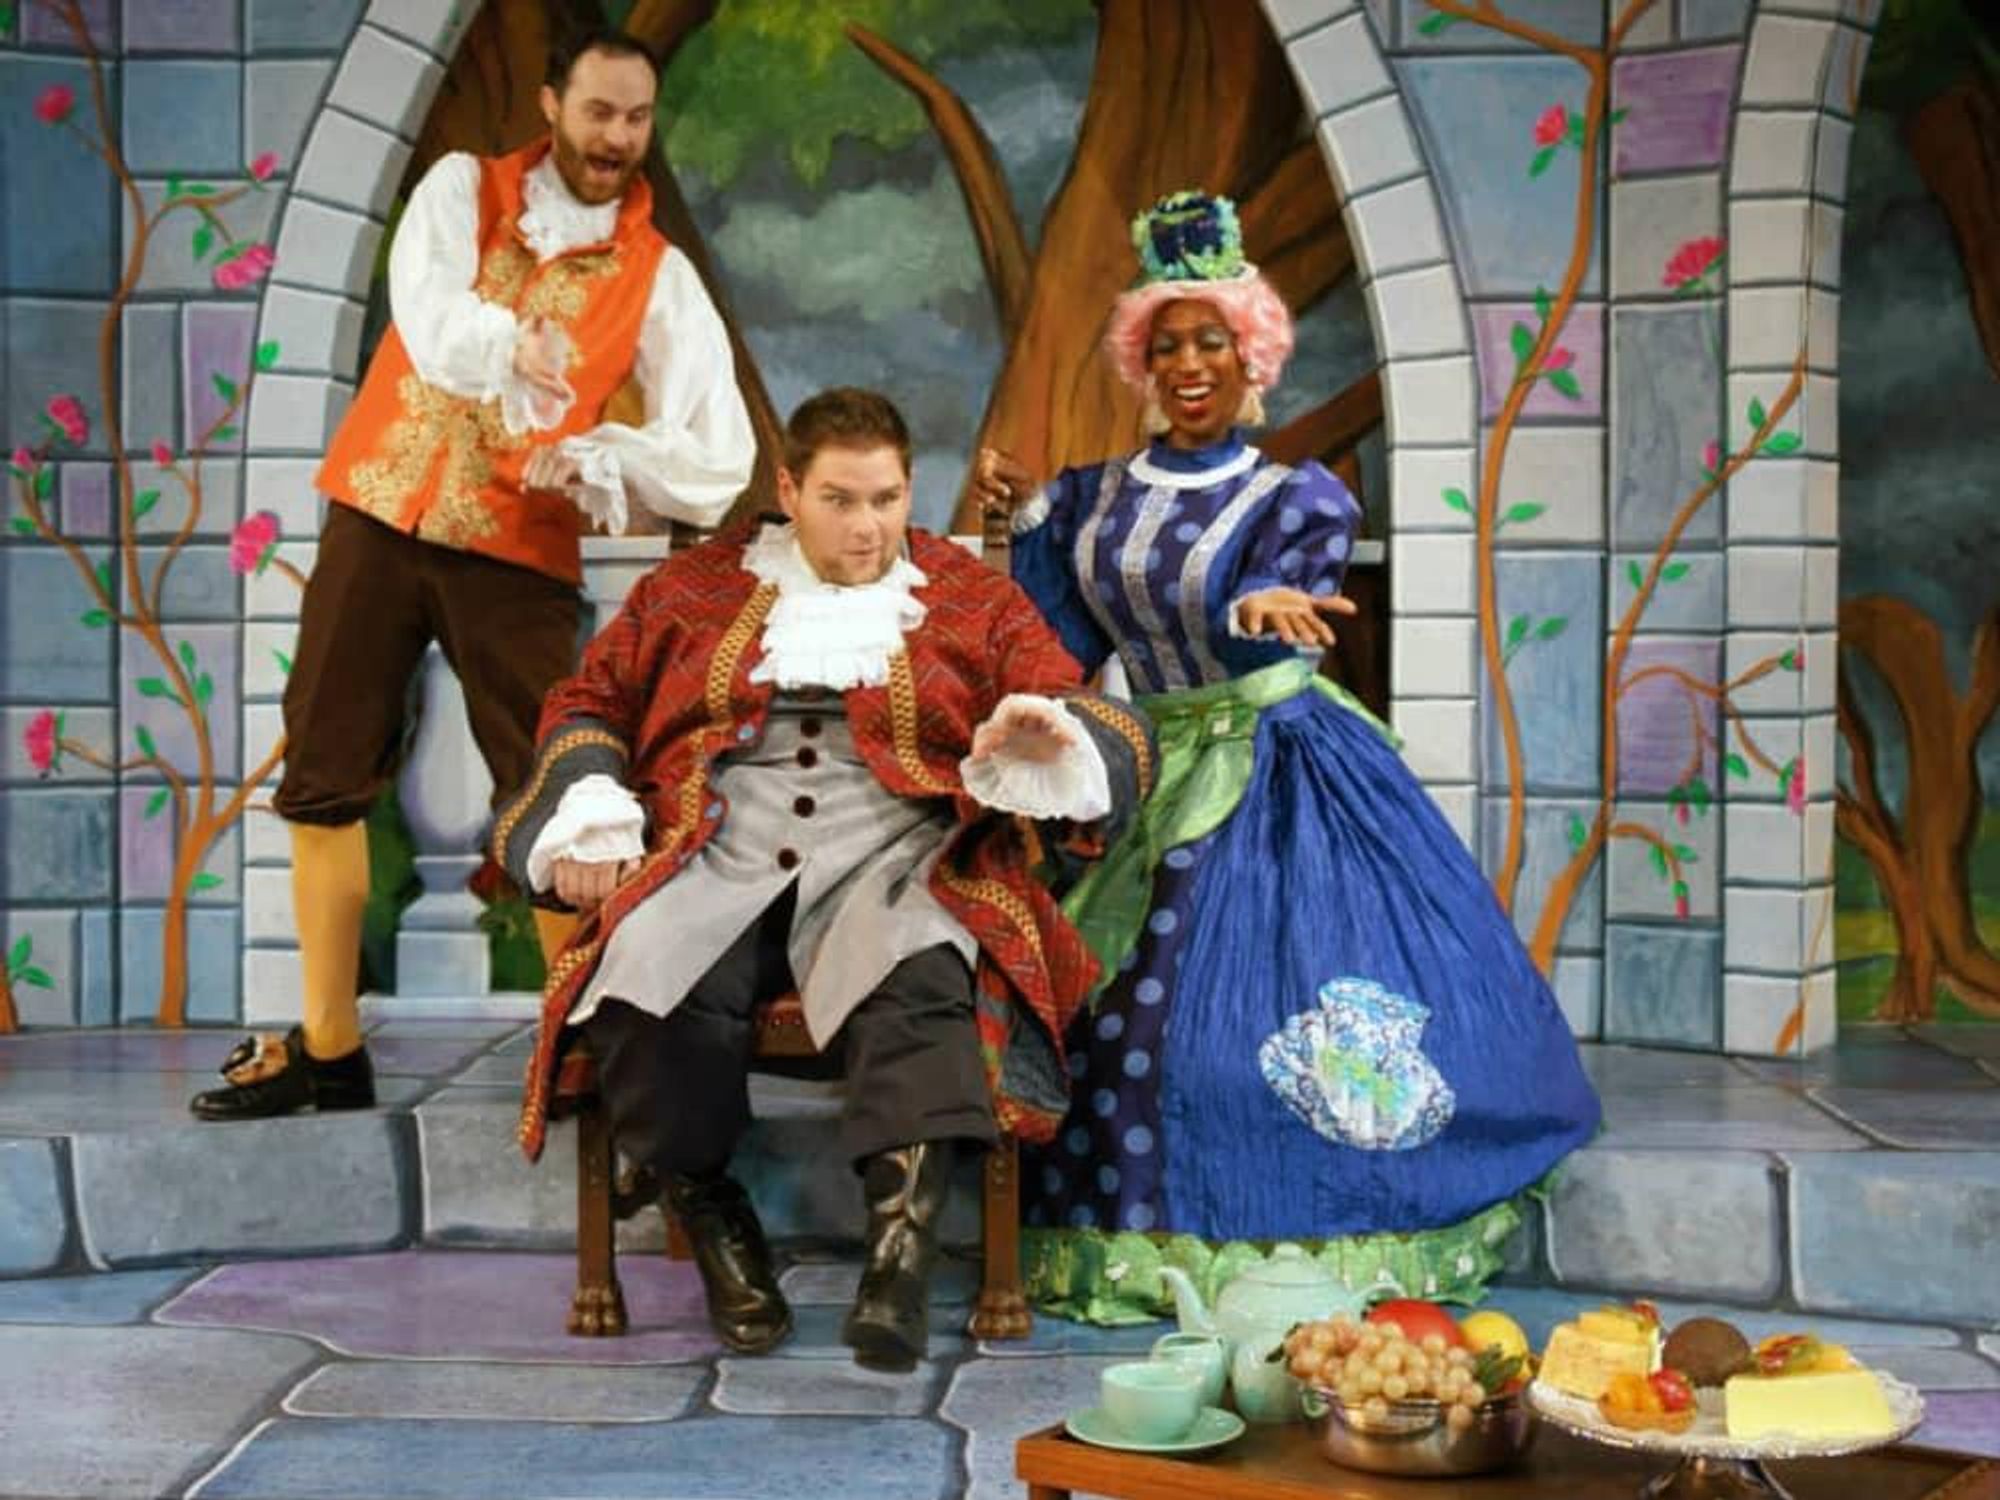 Beauty and the Beast panto at Theatre Britain